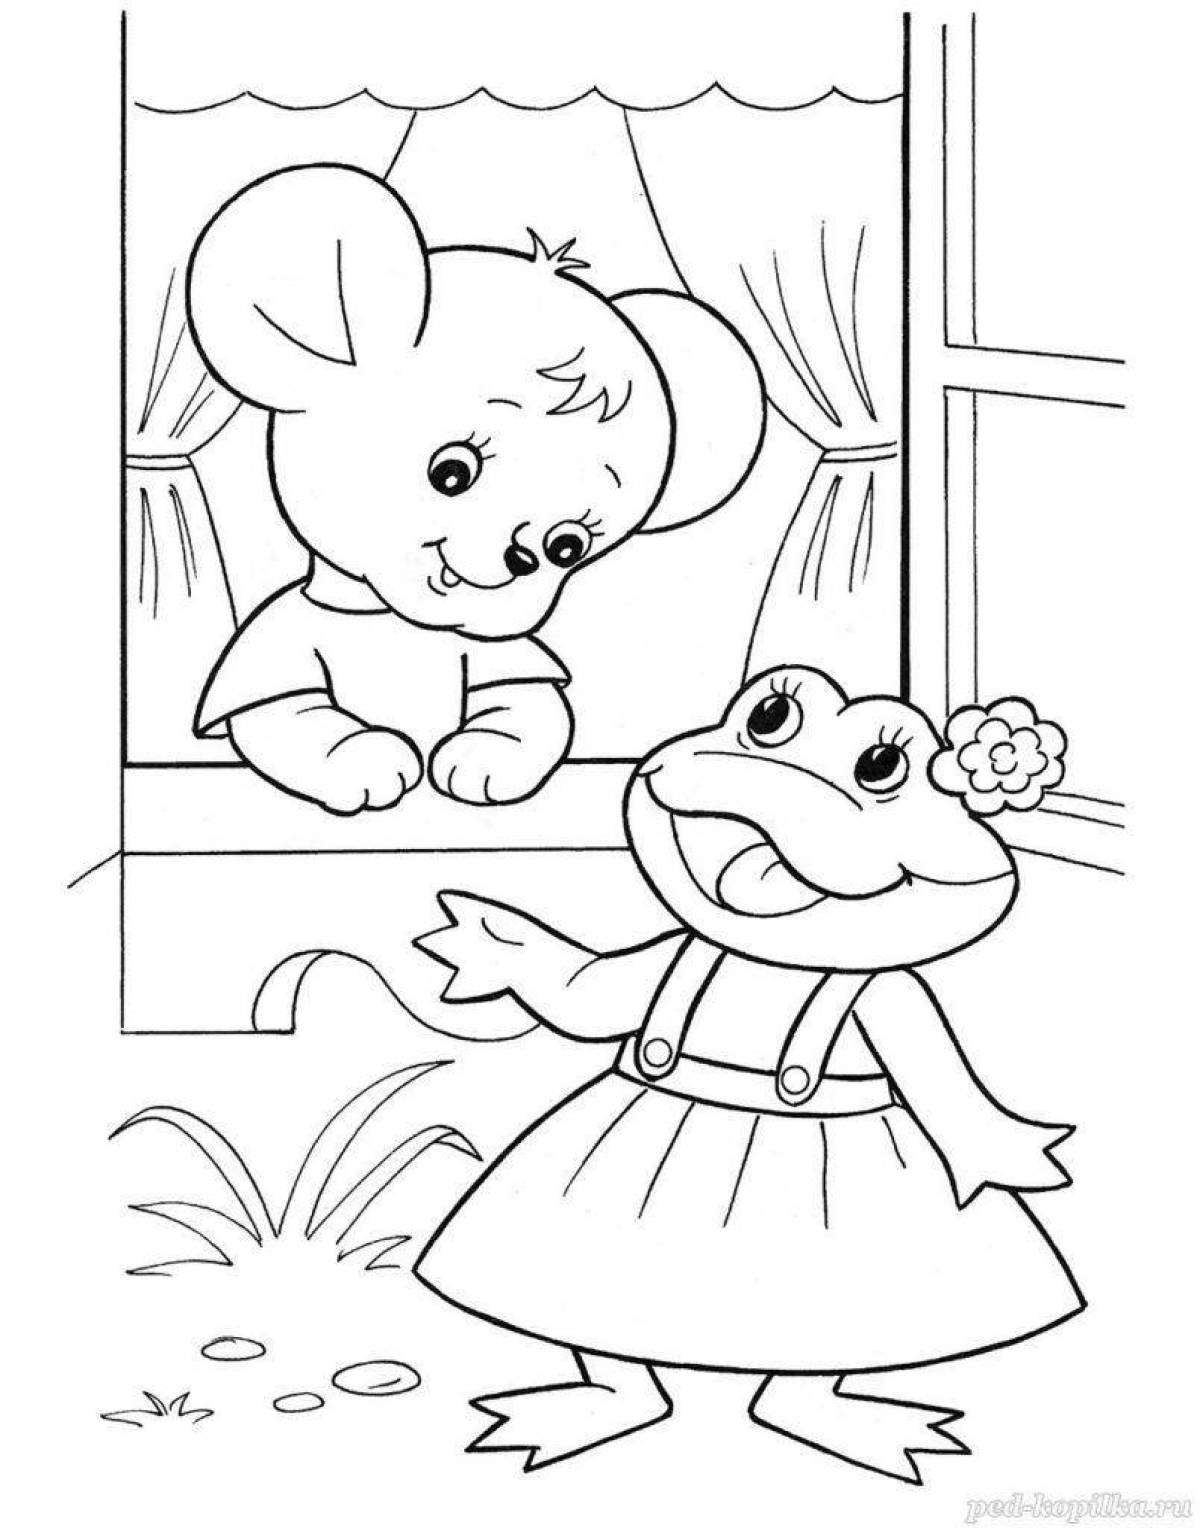 Coloring book bright-eyed mouse norushka